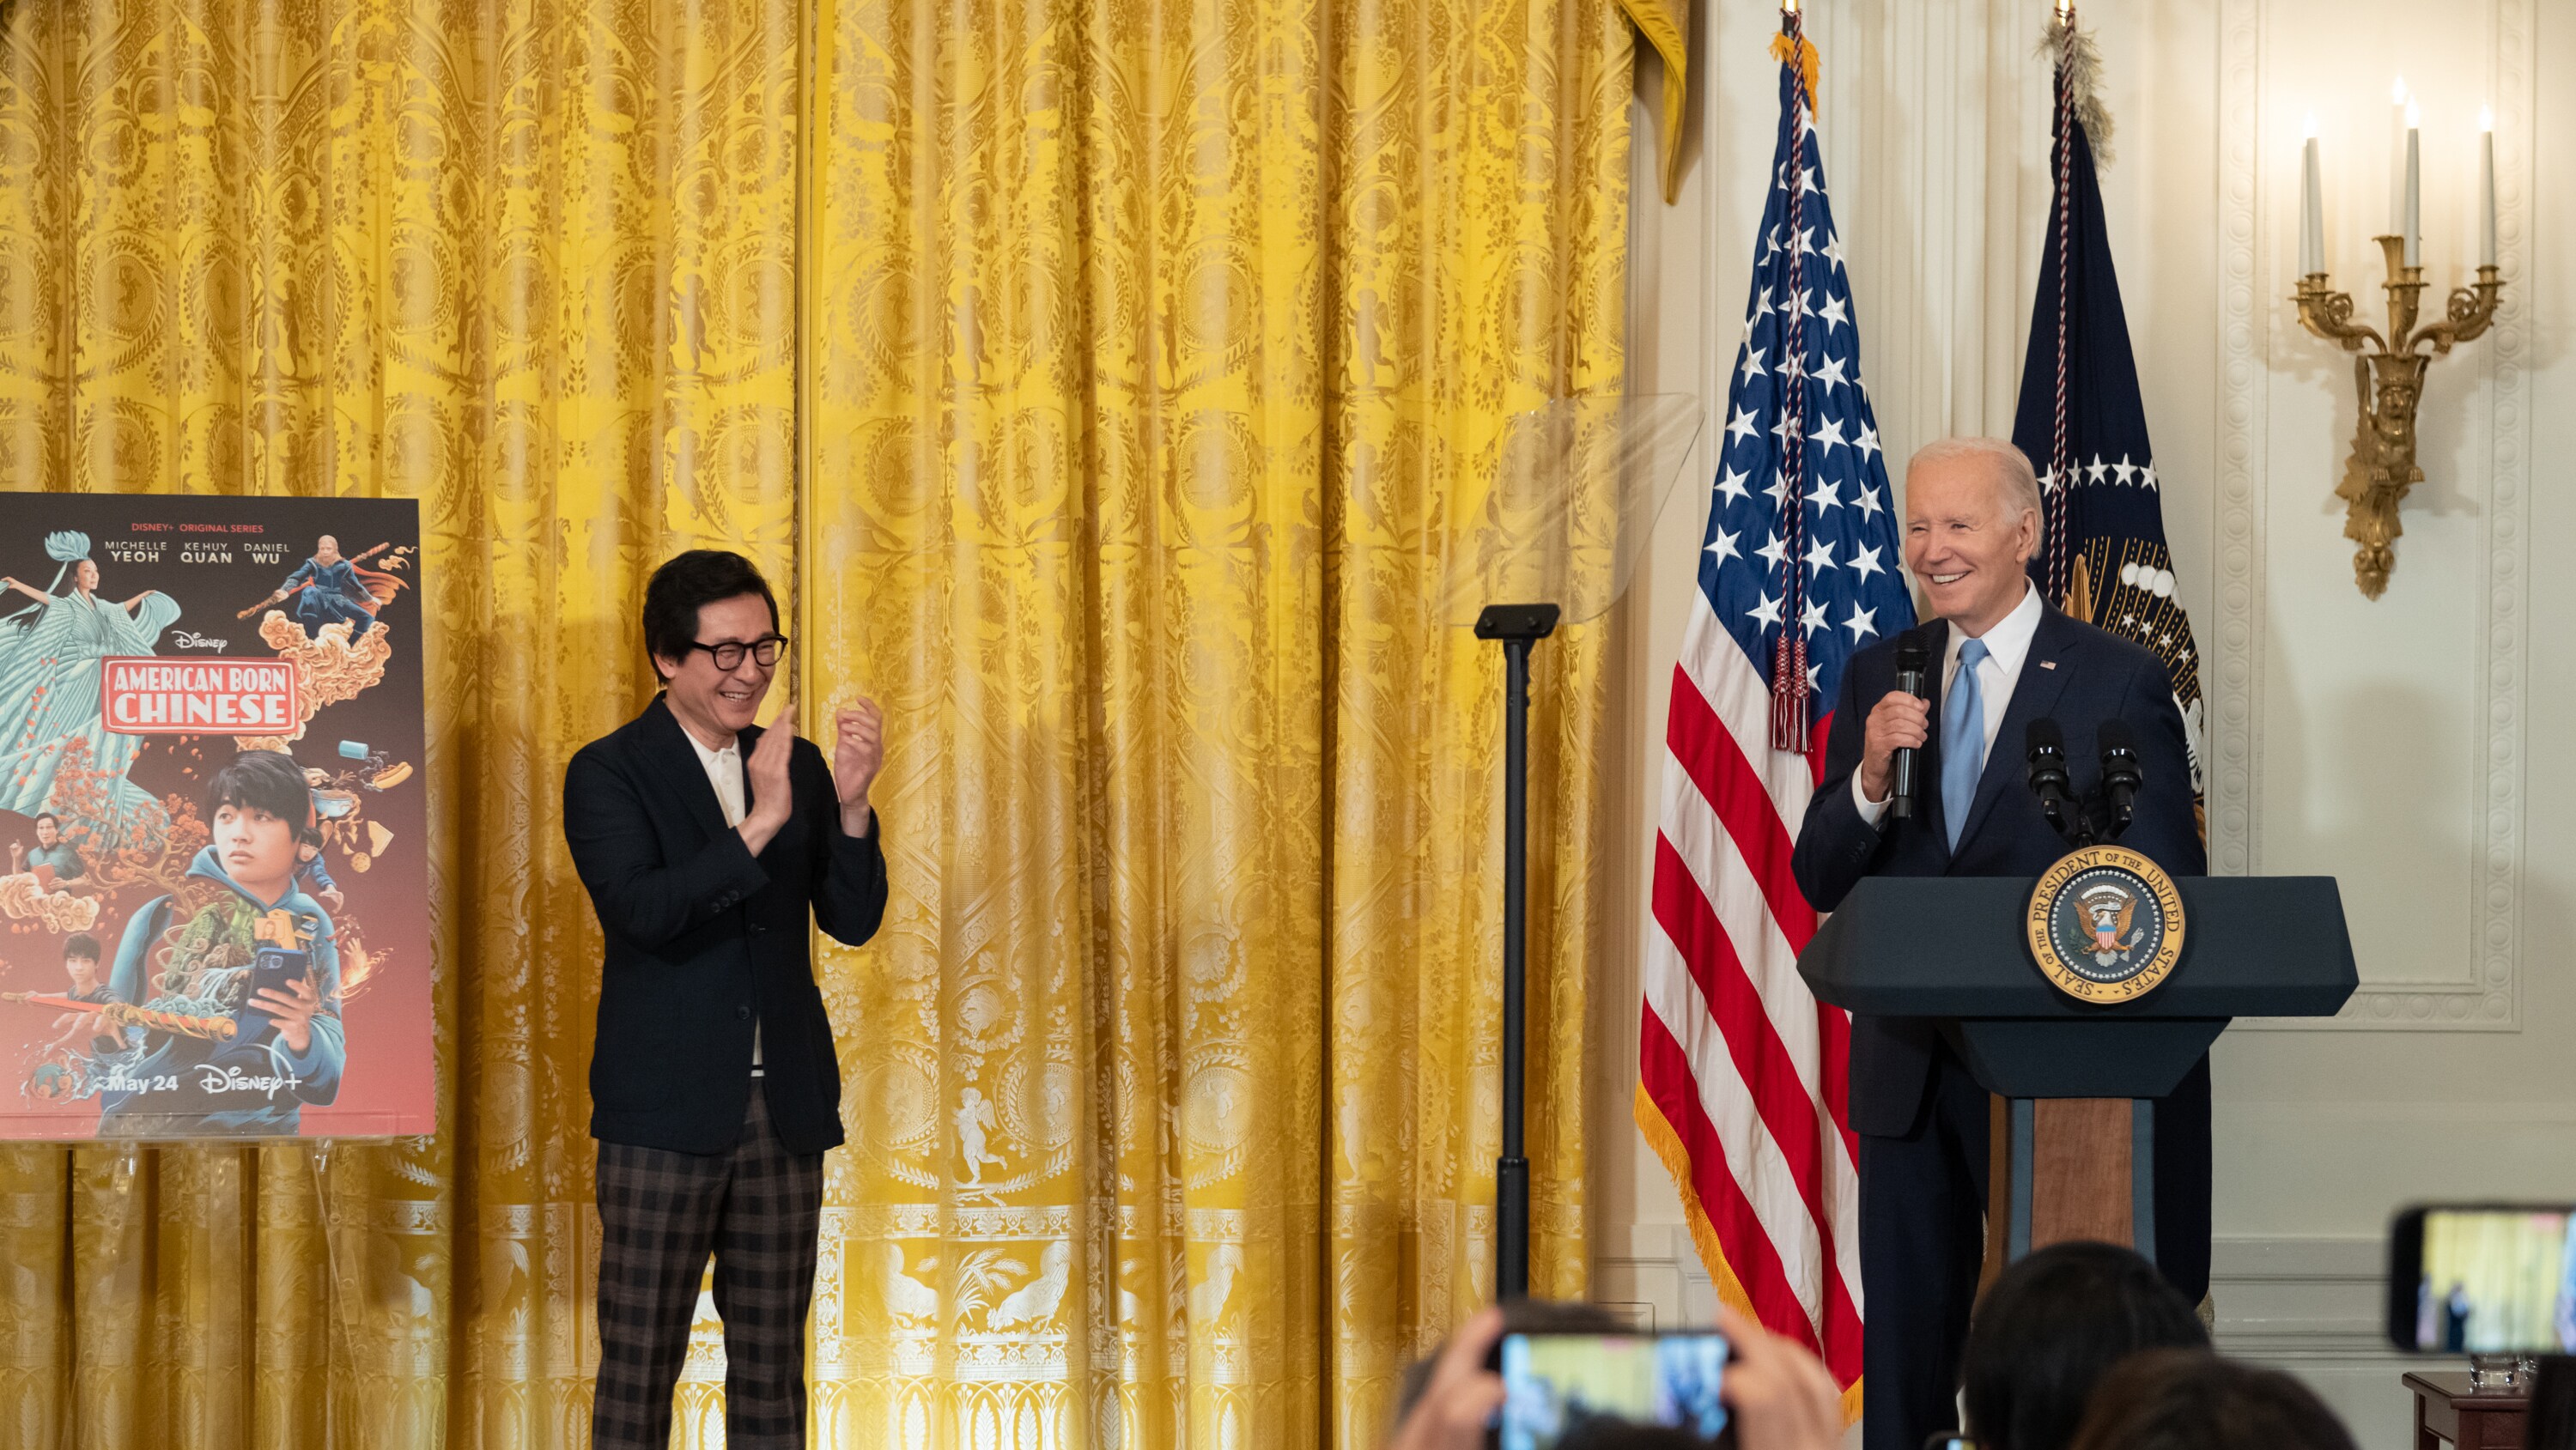 President Biden Hosts Special White House Screening Of Disney+ Original Series ‘American Born Chinese’ In Honor Of Asian American Native Hawaiian And Pacific Islanders Heritage Month